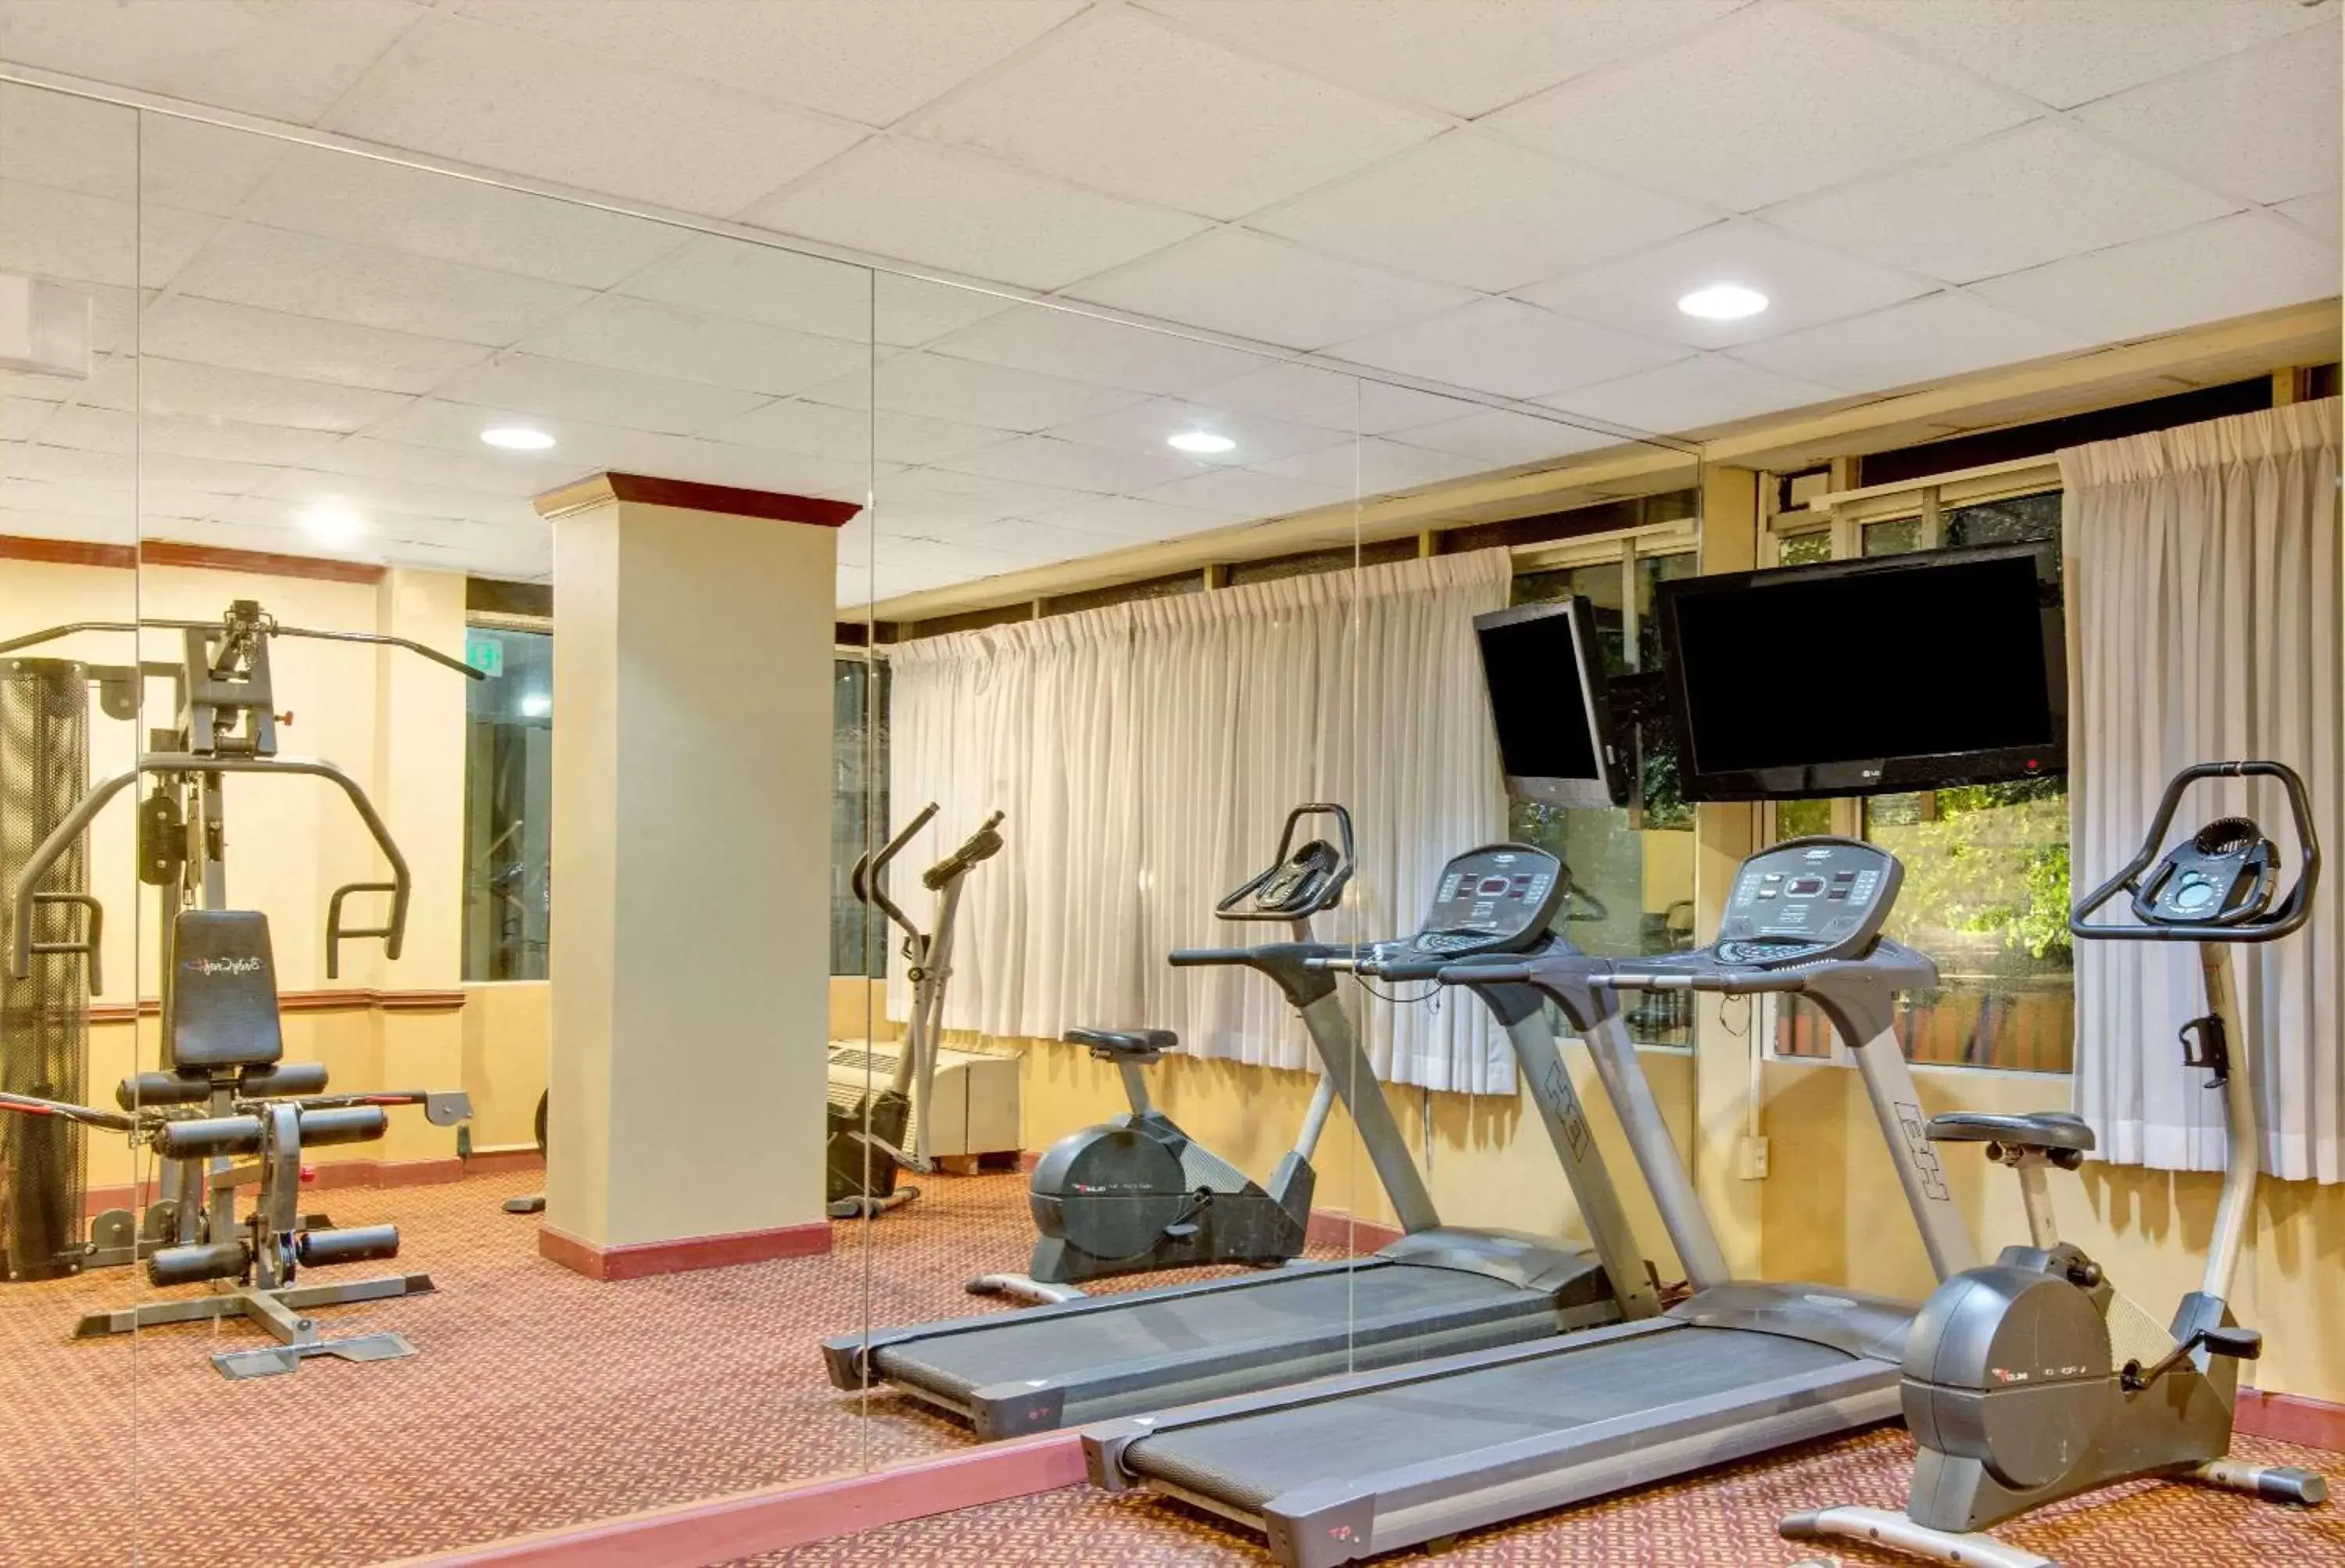 Fitness centre/facilities, Fitness Center/Facilities in Days Inn by Wyndham Towson